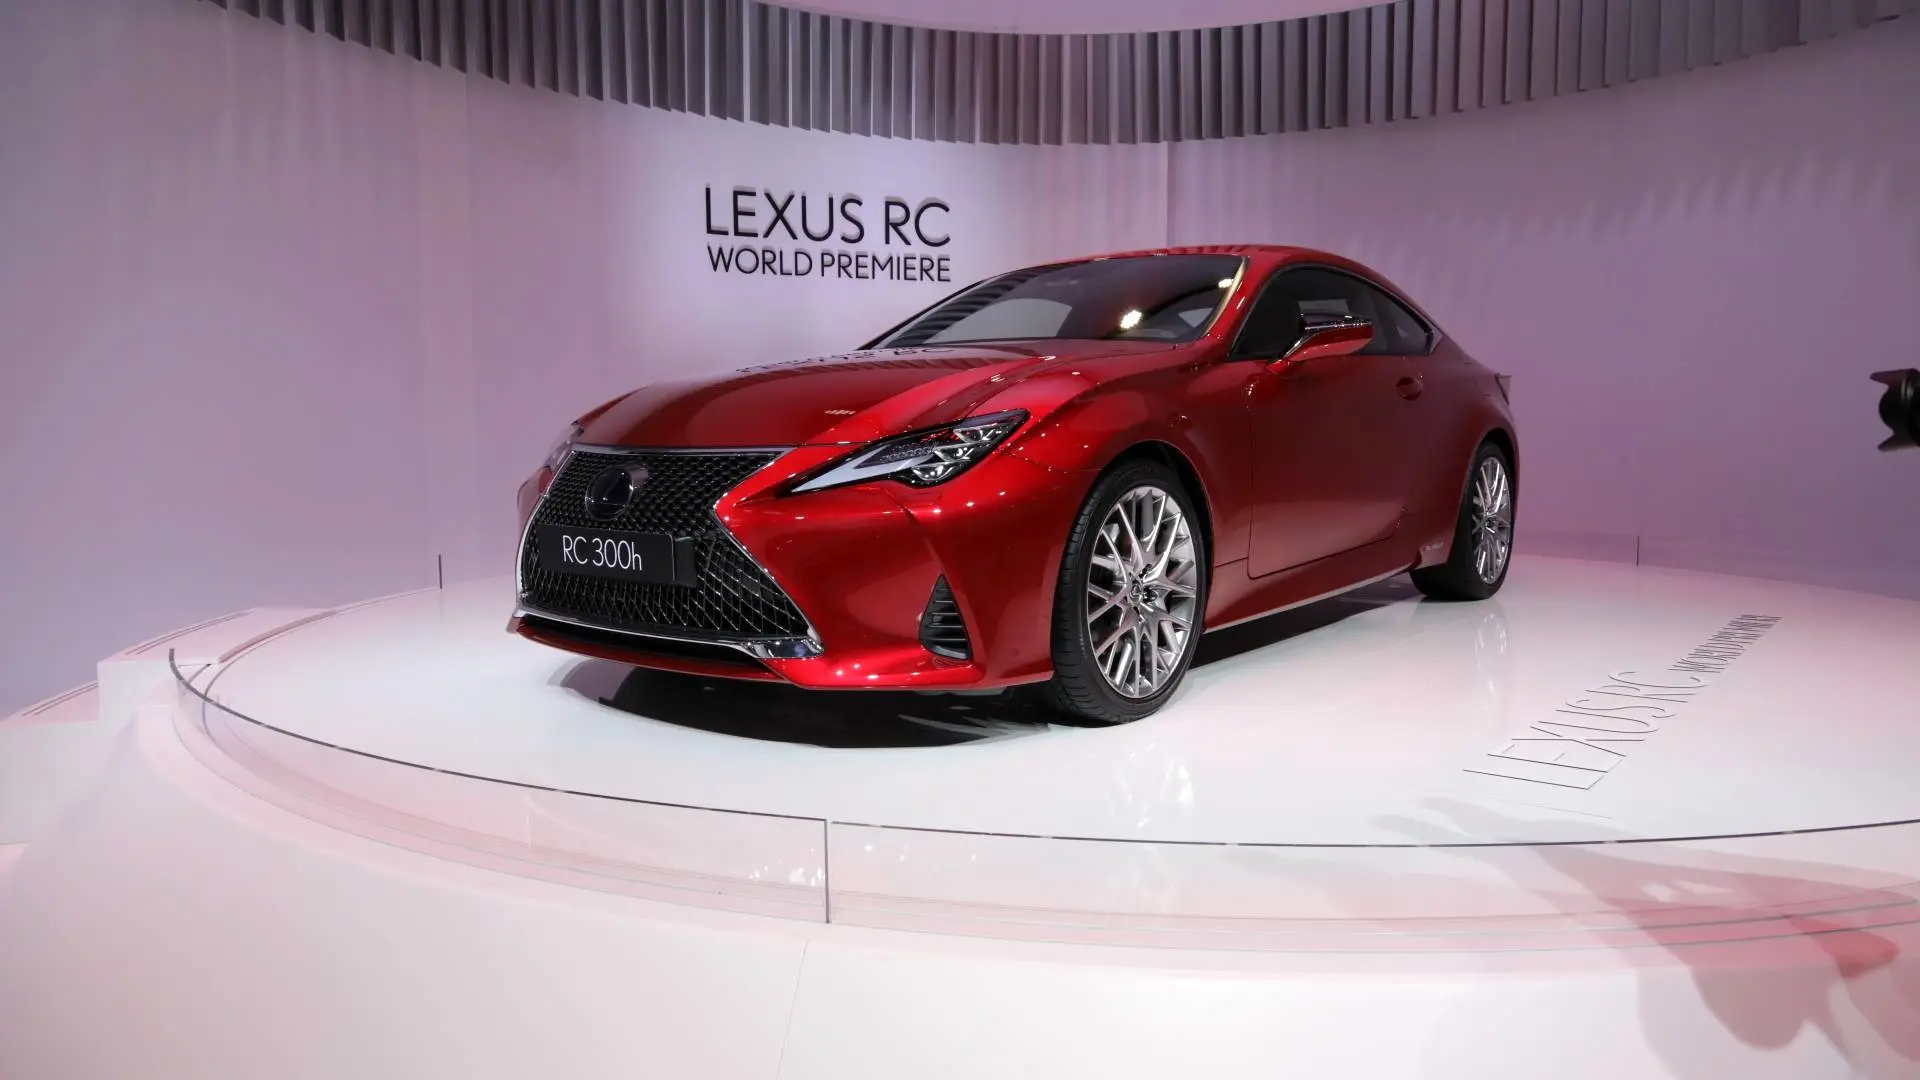 2019 Lexus RC Brings Its Refreshed Face To Paris